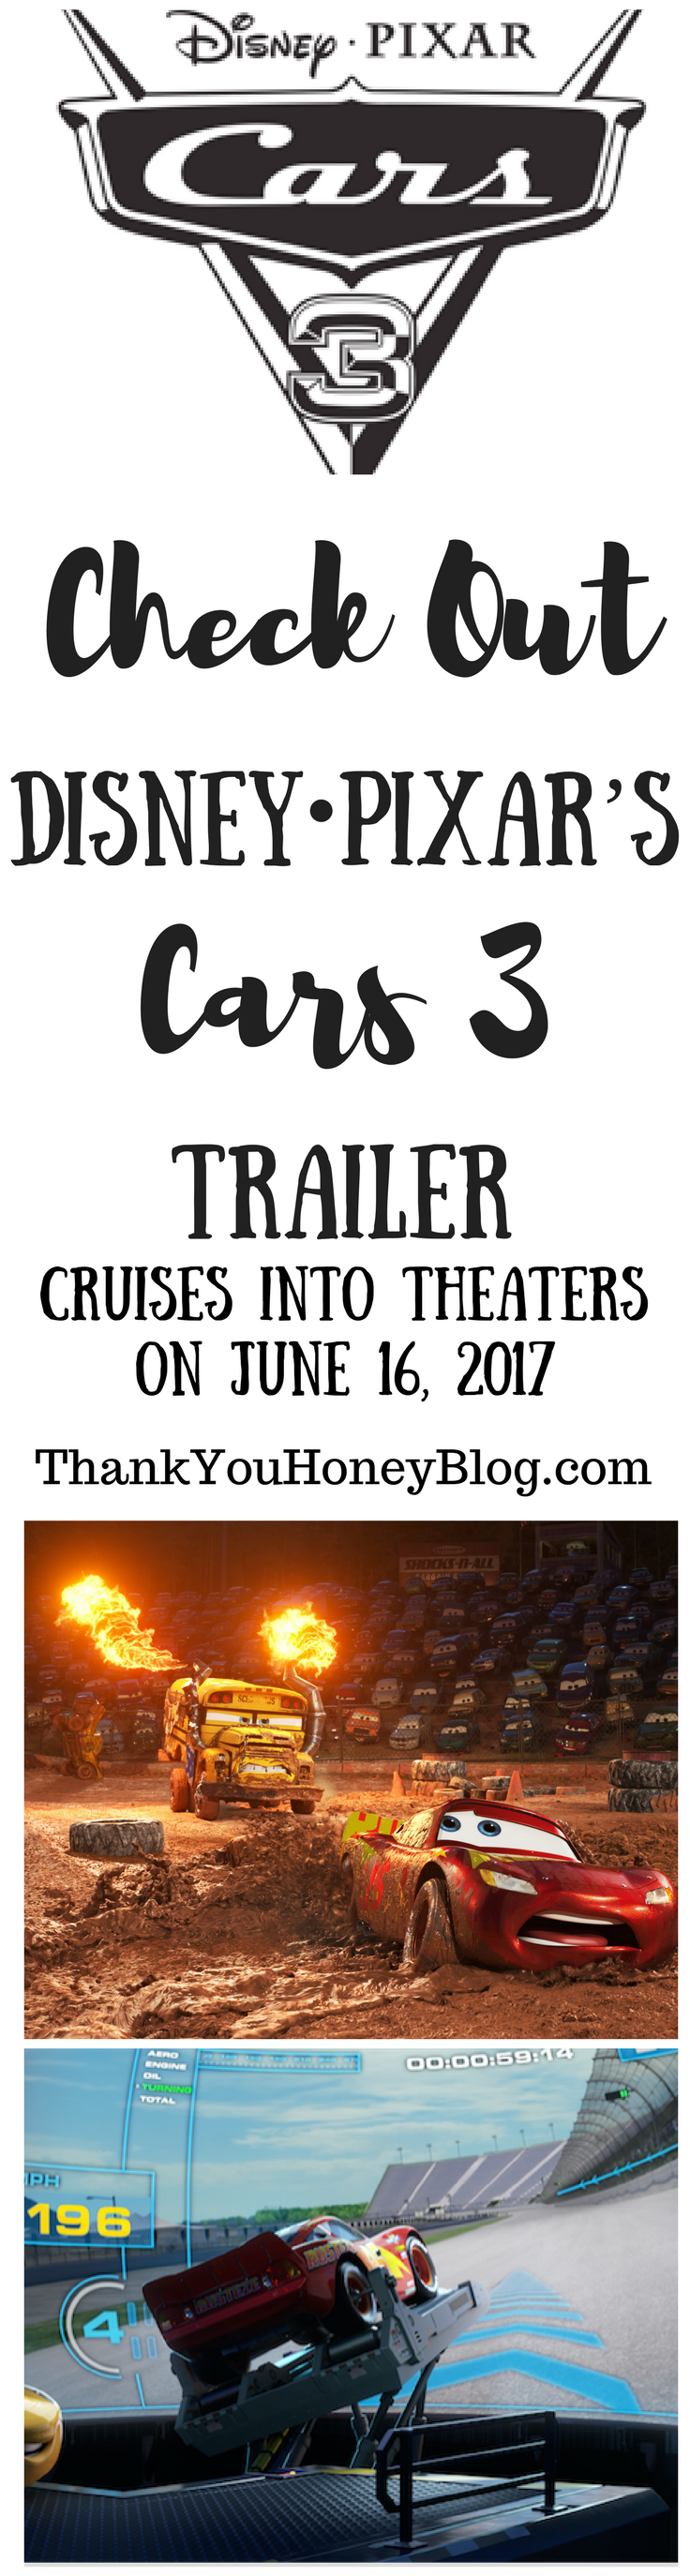 Check out the CARS 3 Trailer